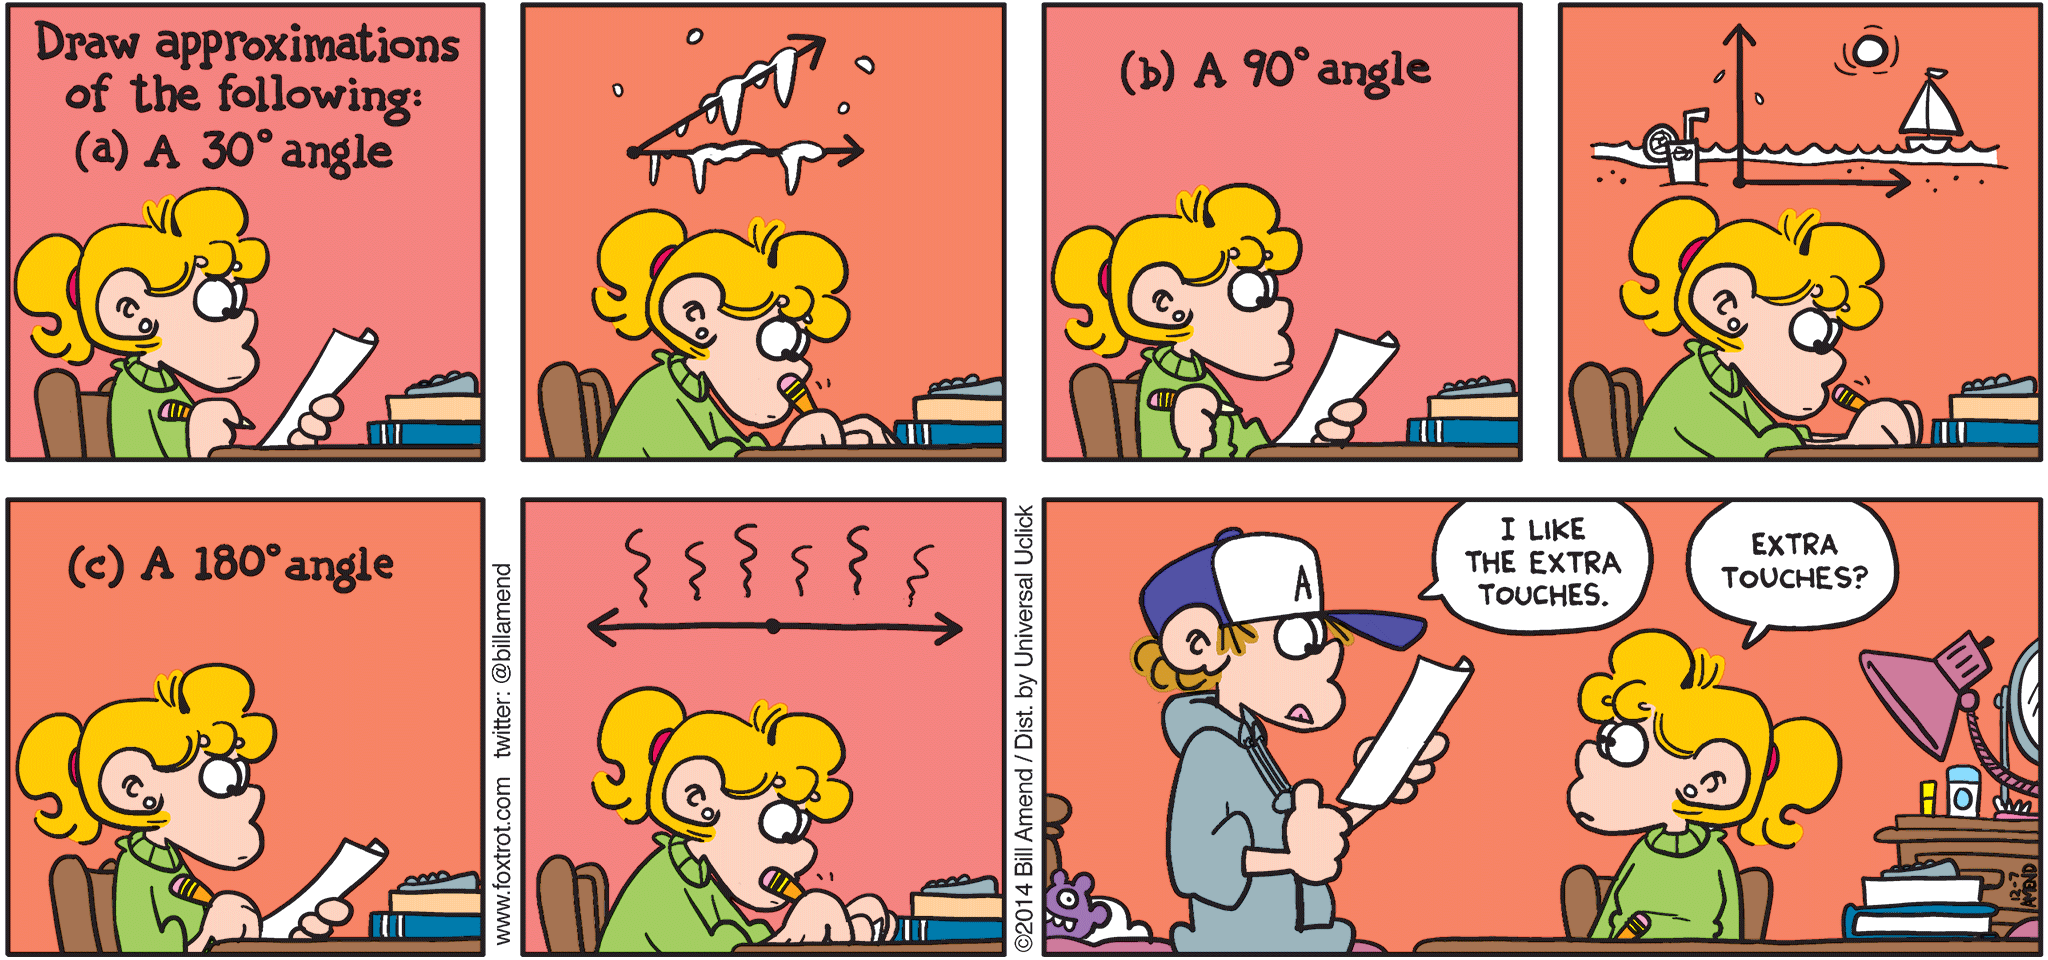 FoxTrot by Bill Amend - "Degrees Illustrated" published December 7, 2014 - Peter: I like the extra touches. Paige: Extra touches?